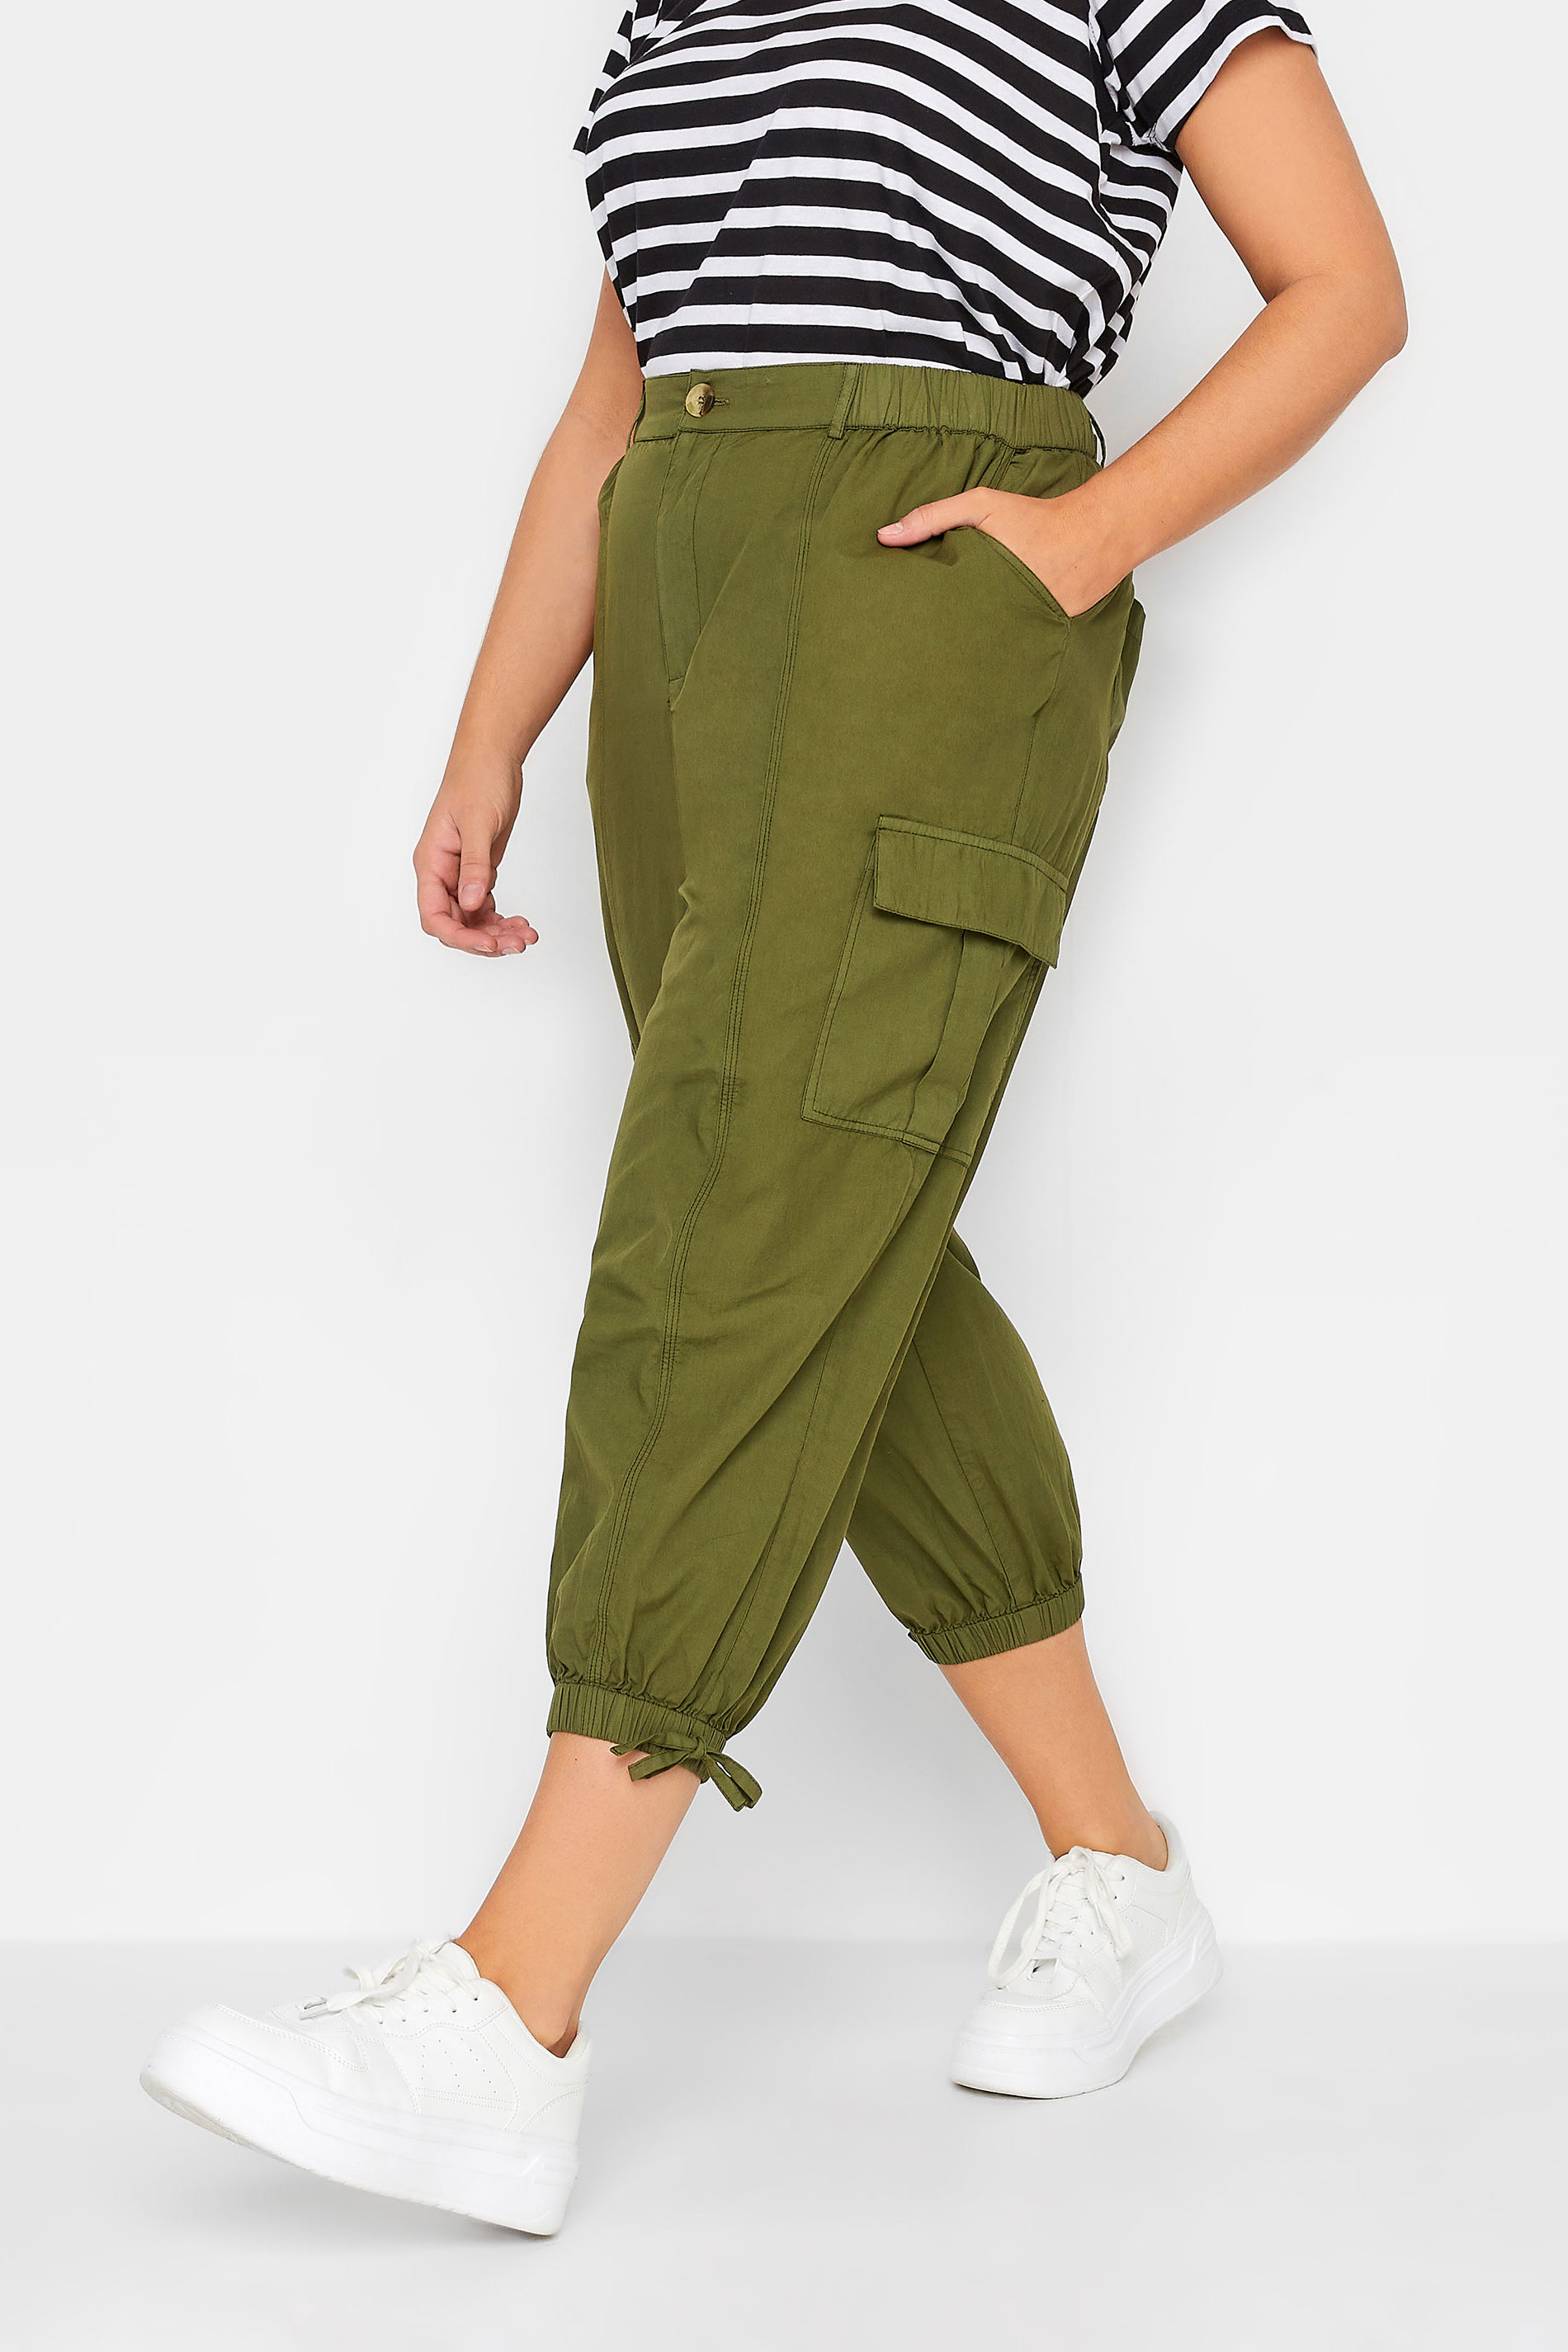 YOURS Curve Plus Size Khaki Green Cropped Cargo Trousers | Yours Clothing  1